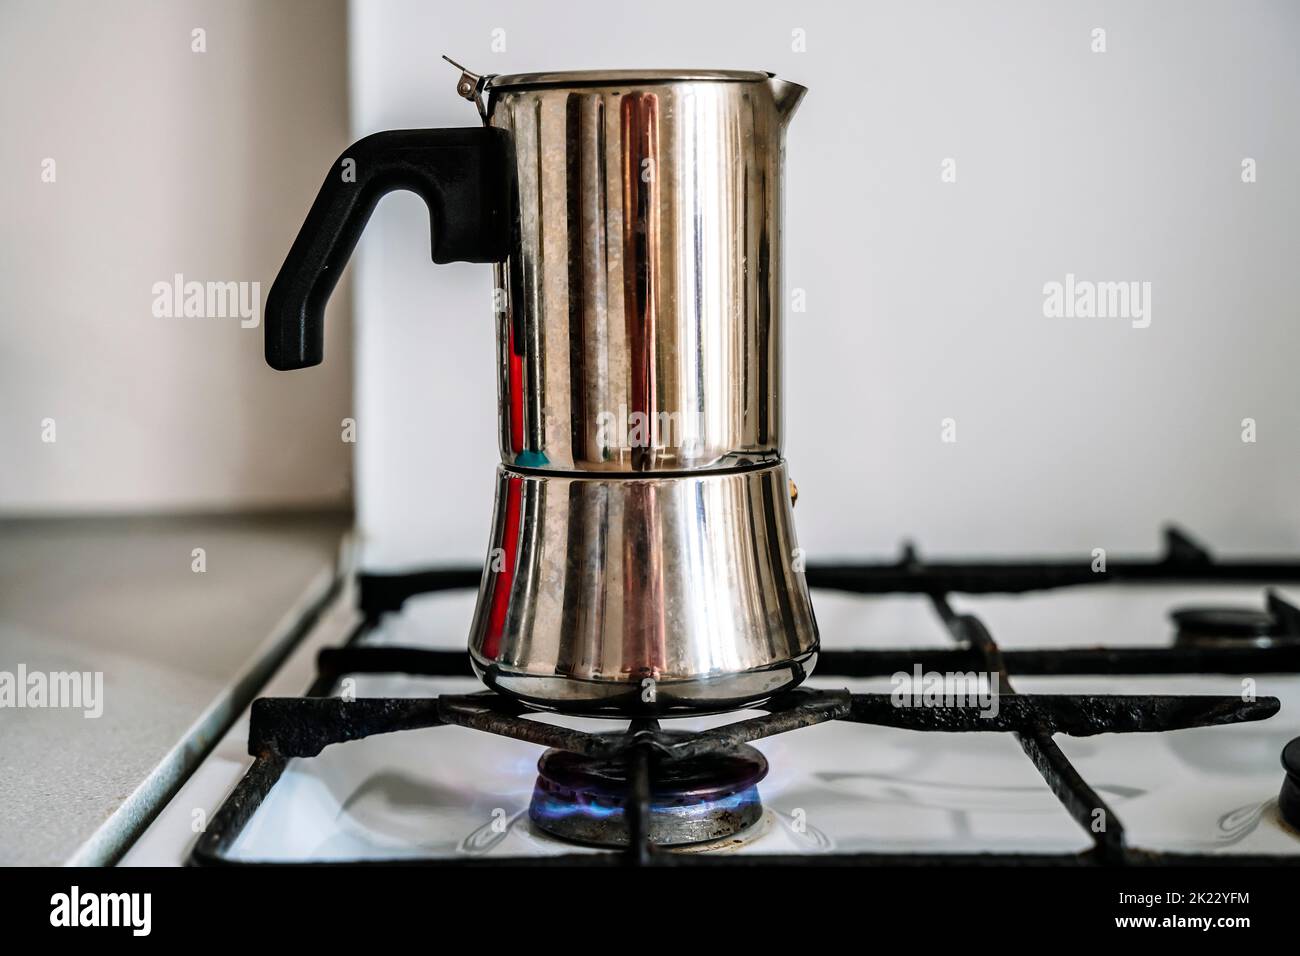 Metal coffee maker for brewing espresso coffee on the stove. Alternative brewing methods. High quality photo Stock Photo